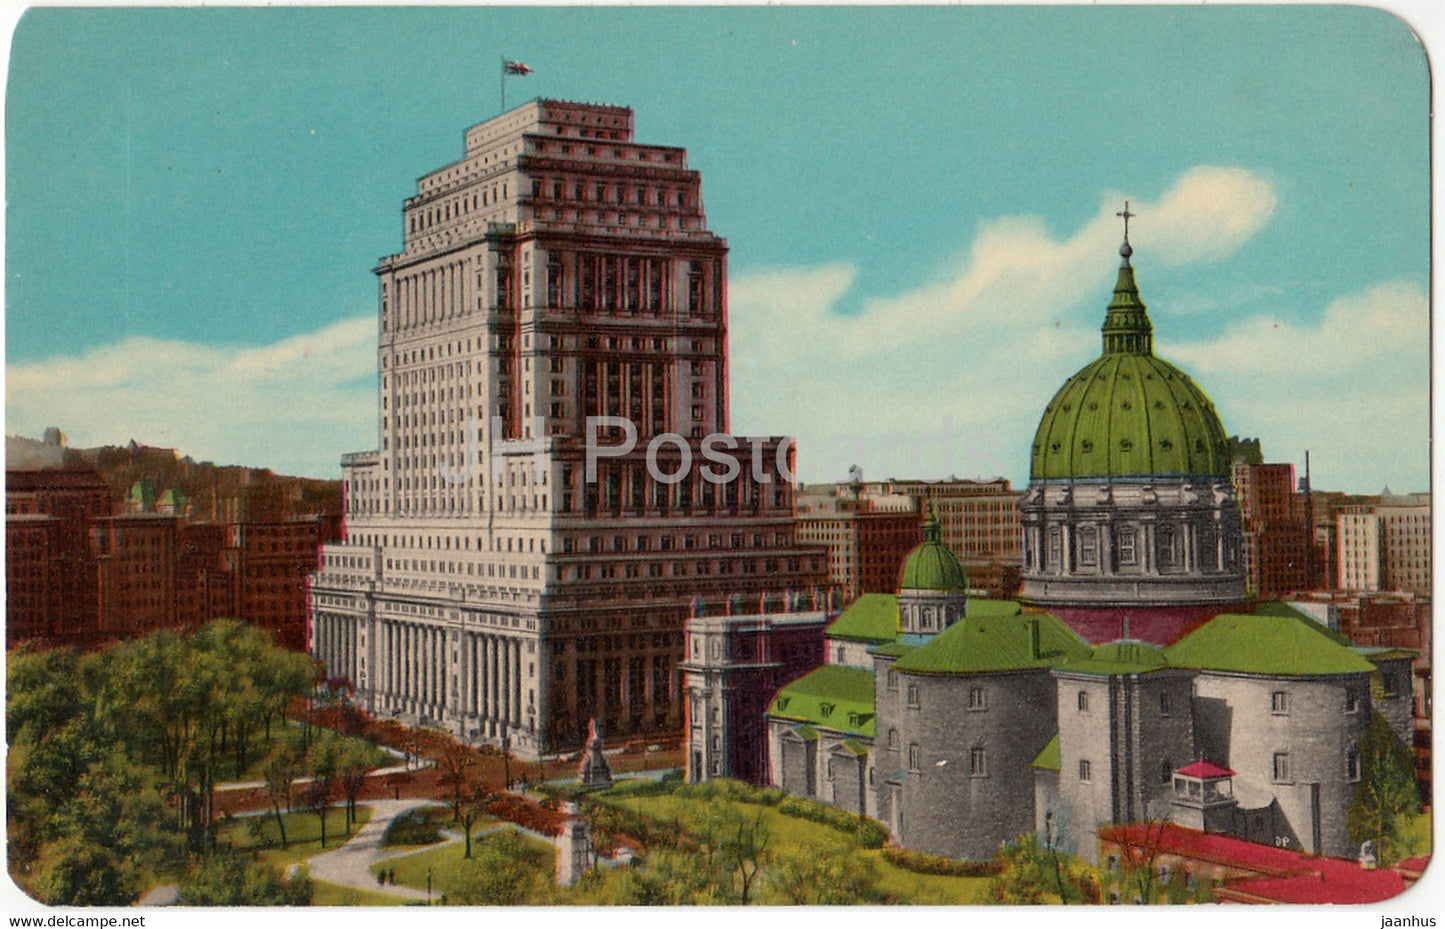 Montreal Sun Life Building and St James Cathedral - Edifice Sun Life et la Cathedrale St Jacques - Canada - unused - JH Postcards